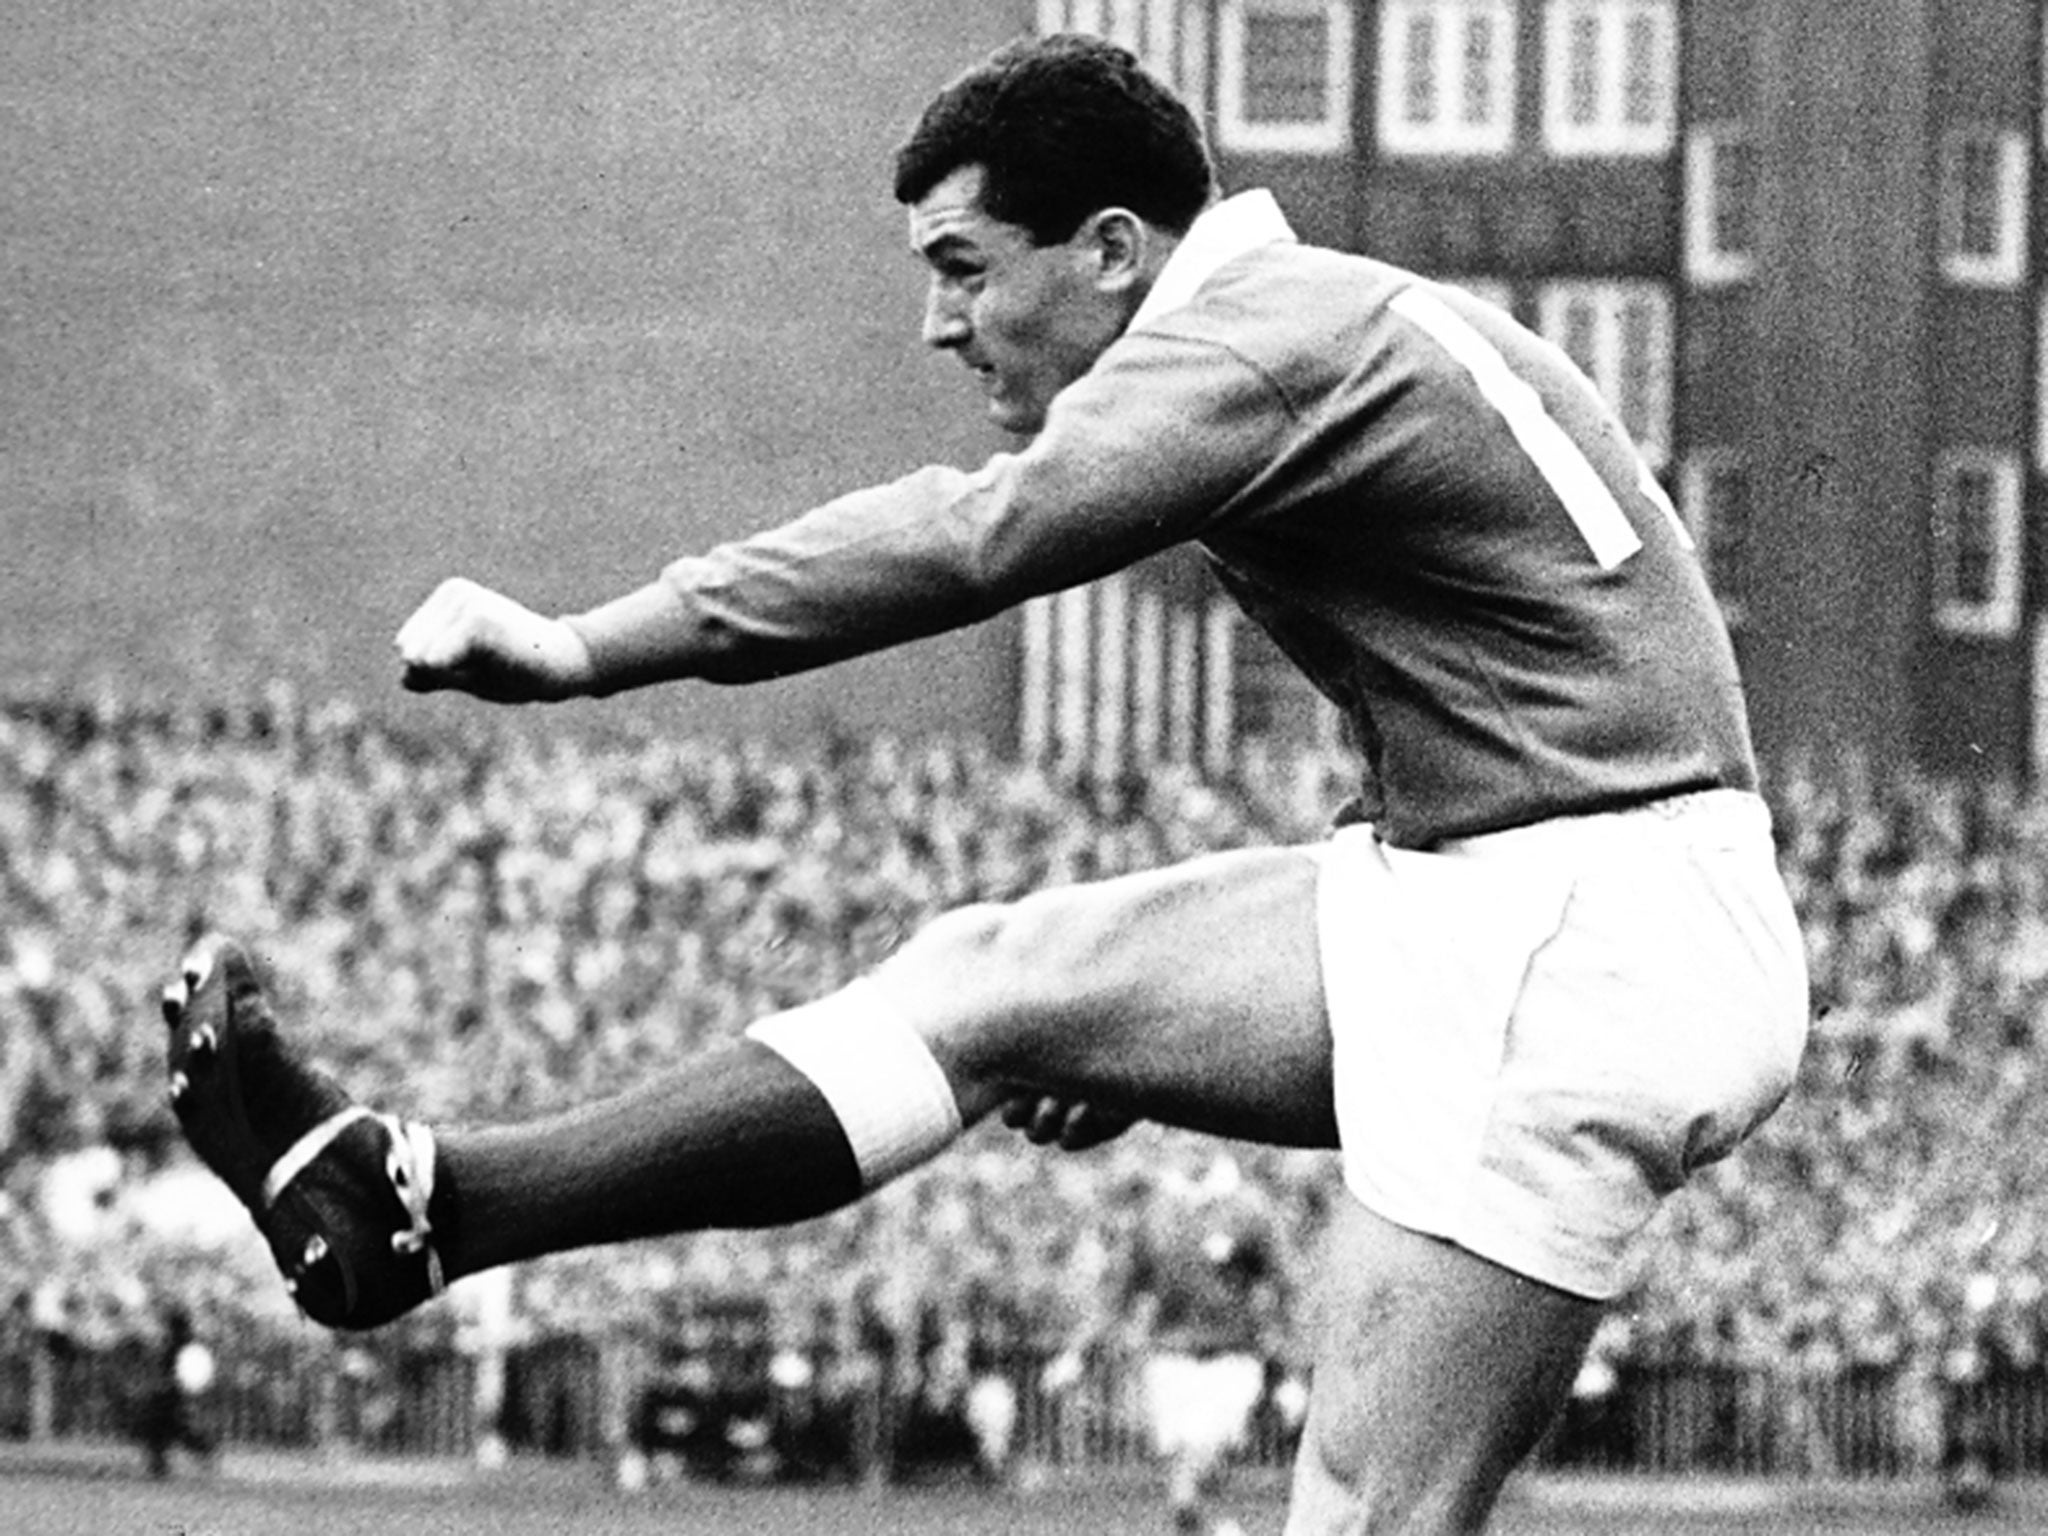 Star turn: The 18-year-old Keith Jarrett cut England to shreds in Cardiff in 1967